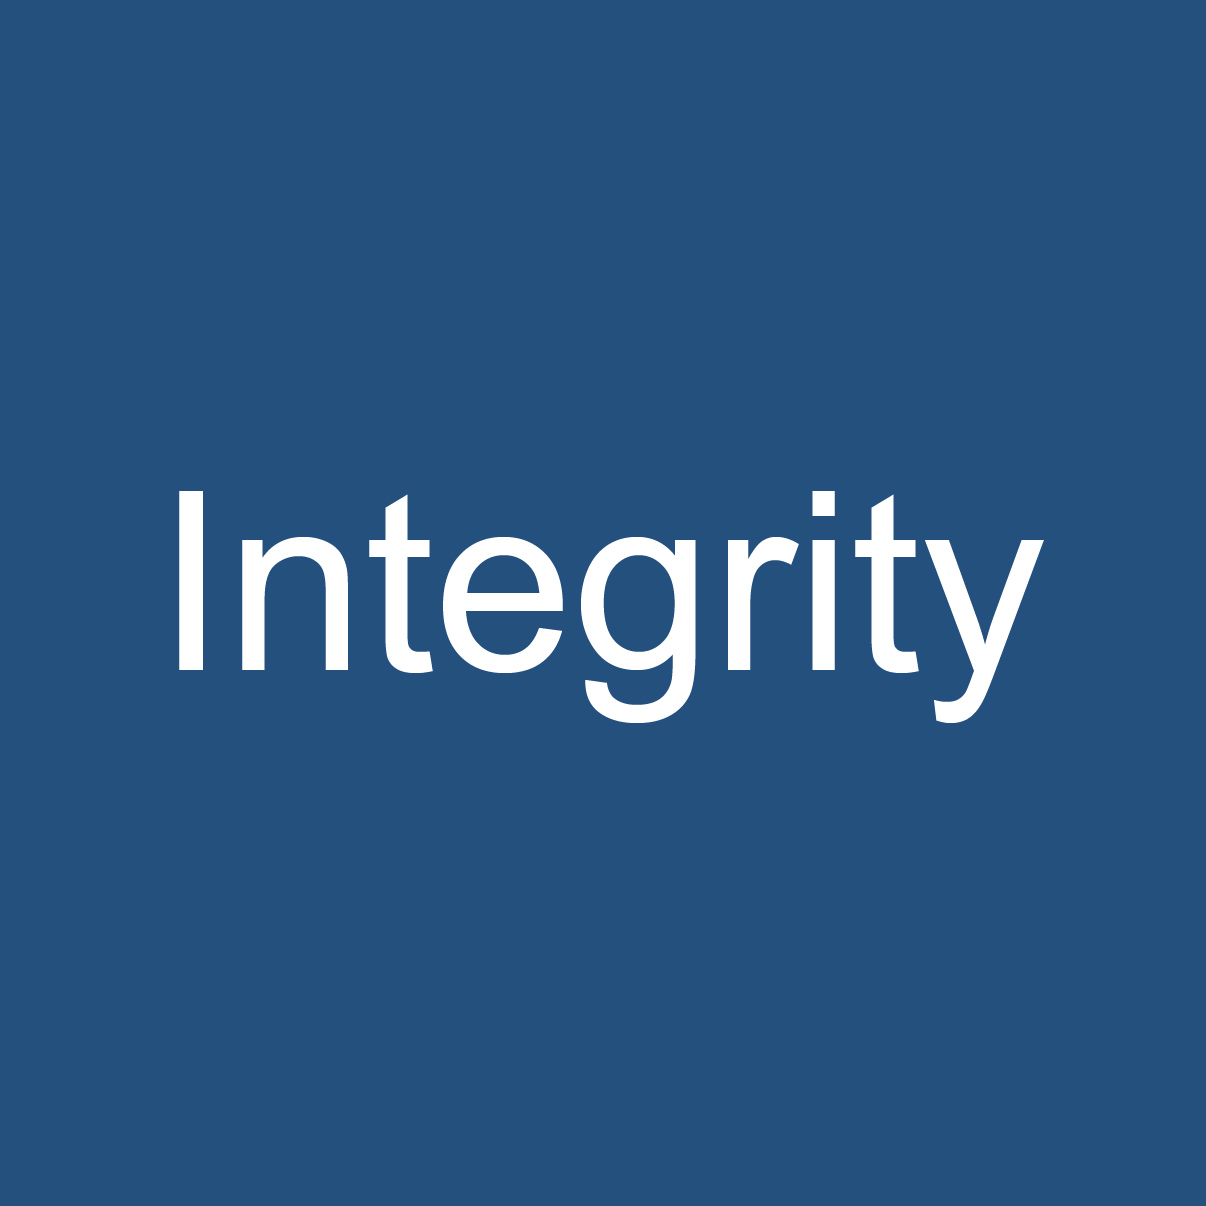 Integrity in international justice